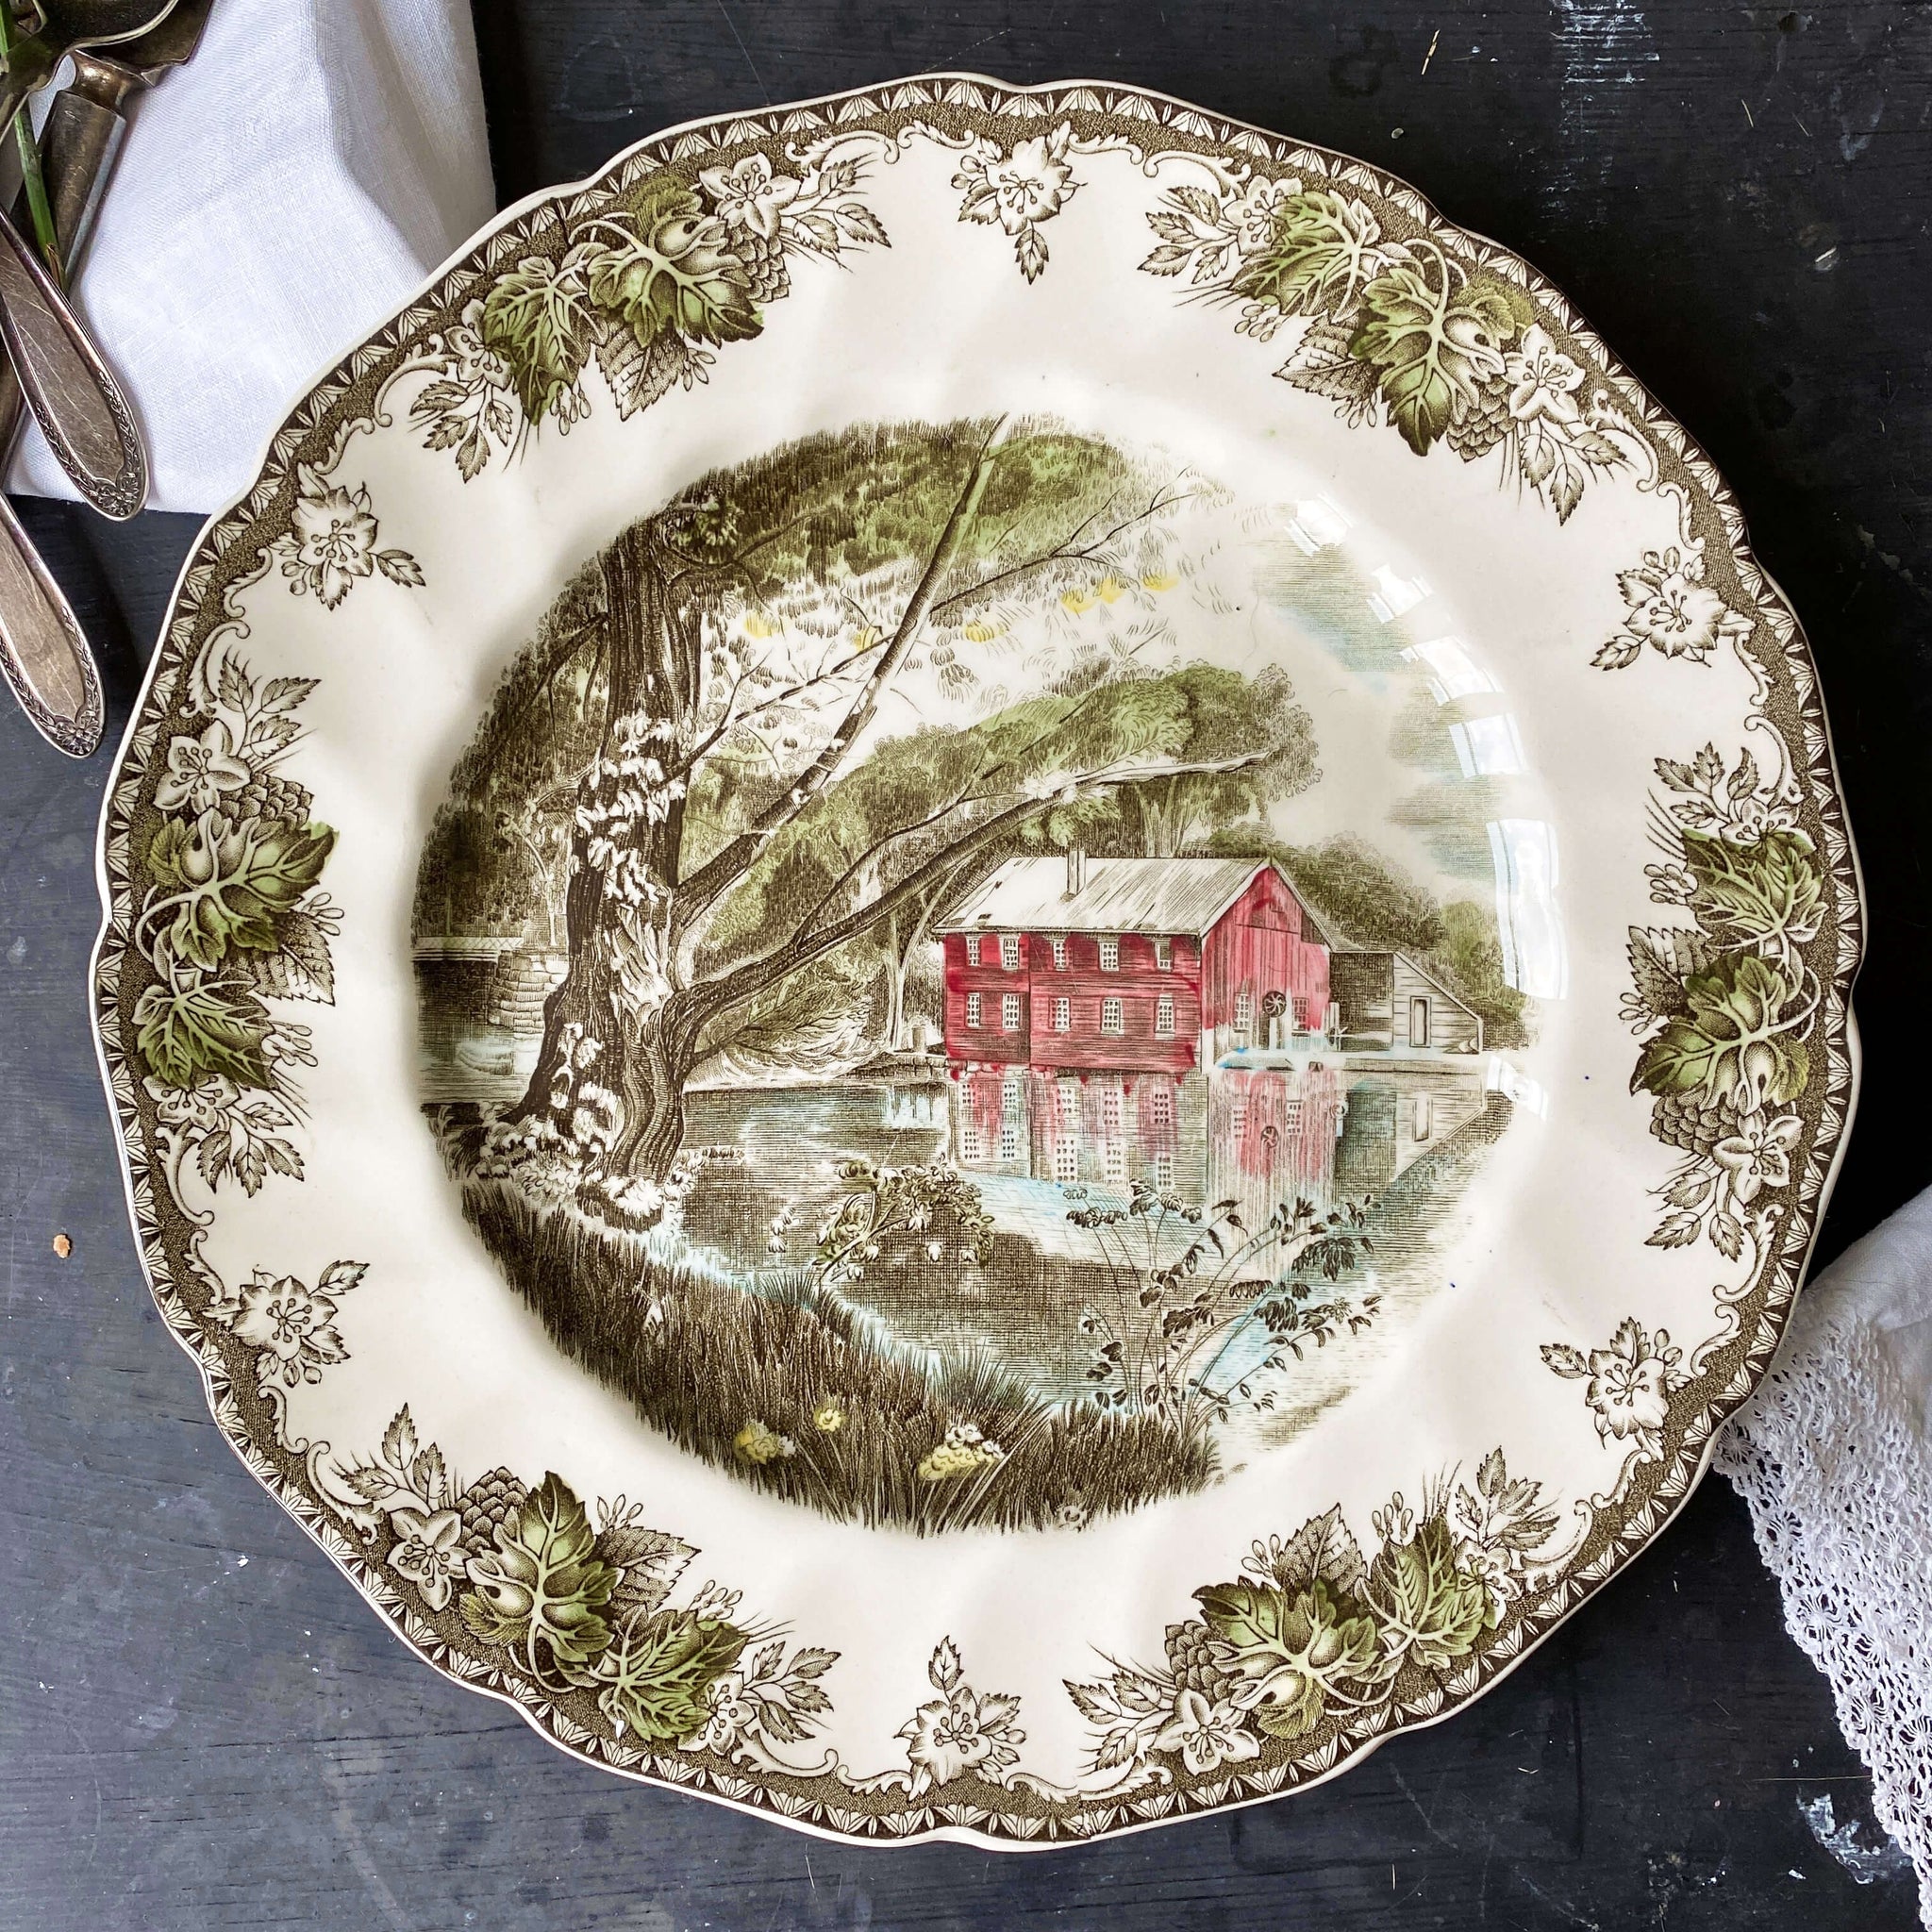 Vintage Johnson Brothers Friendly Village Dinner Plates - The School House & The Old Mill